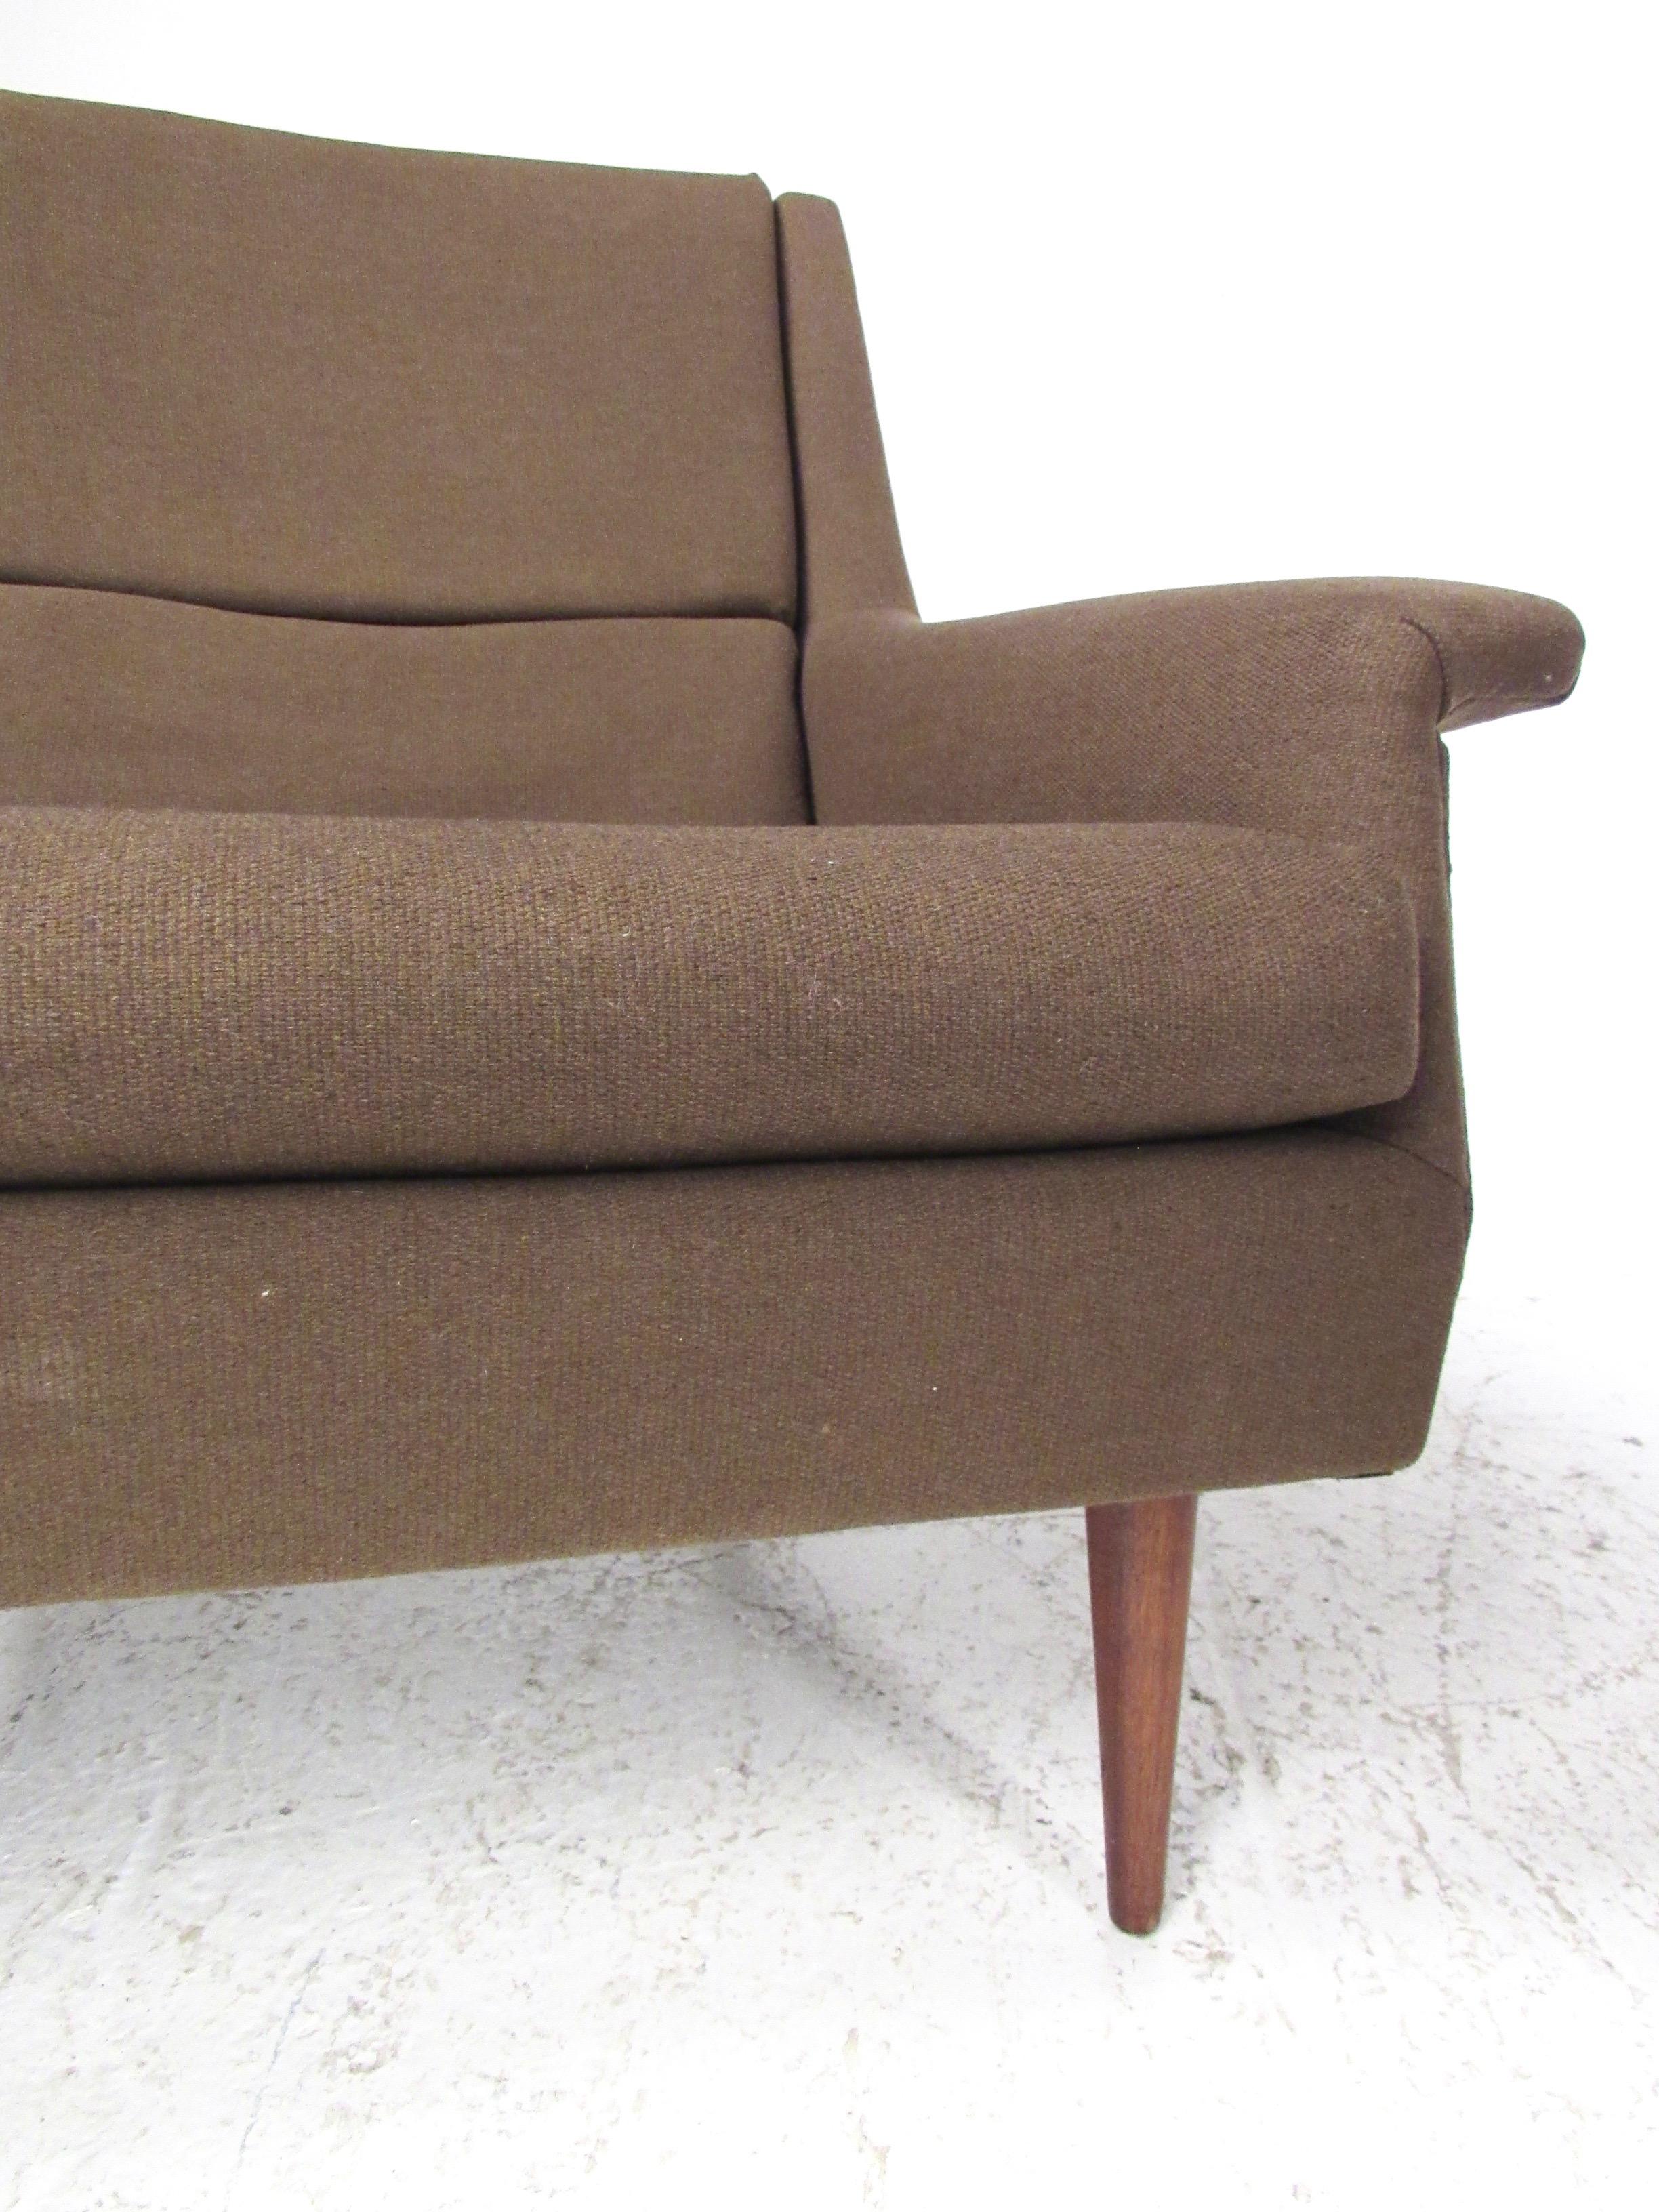 Pair of Milo Baughman Upholstered Lounge Chairs For Sale 10